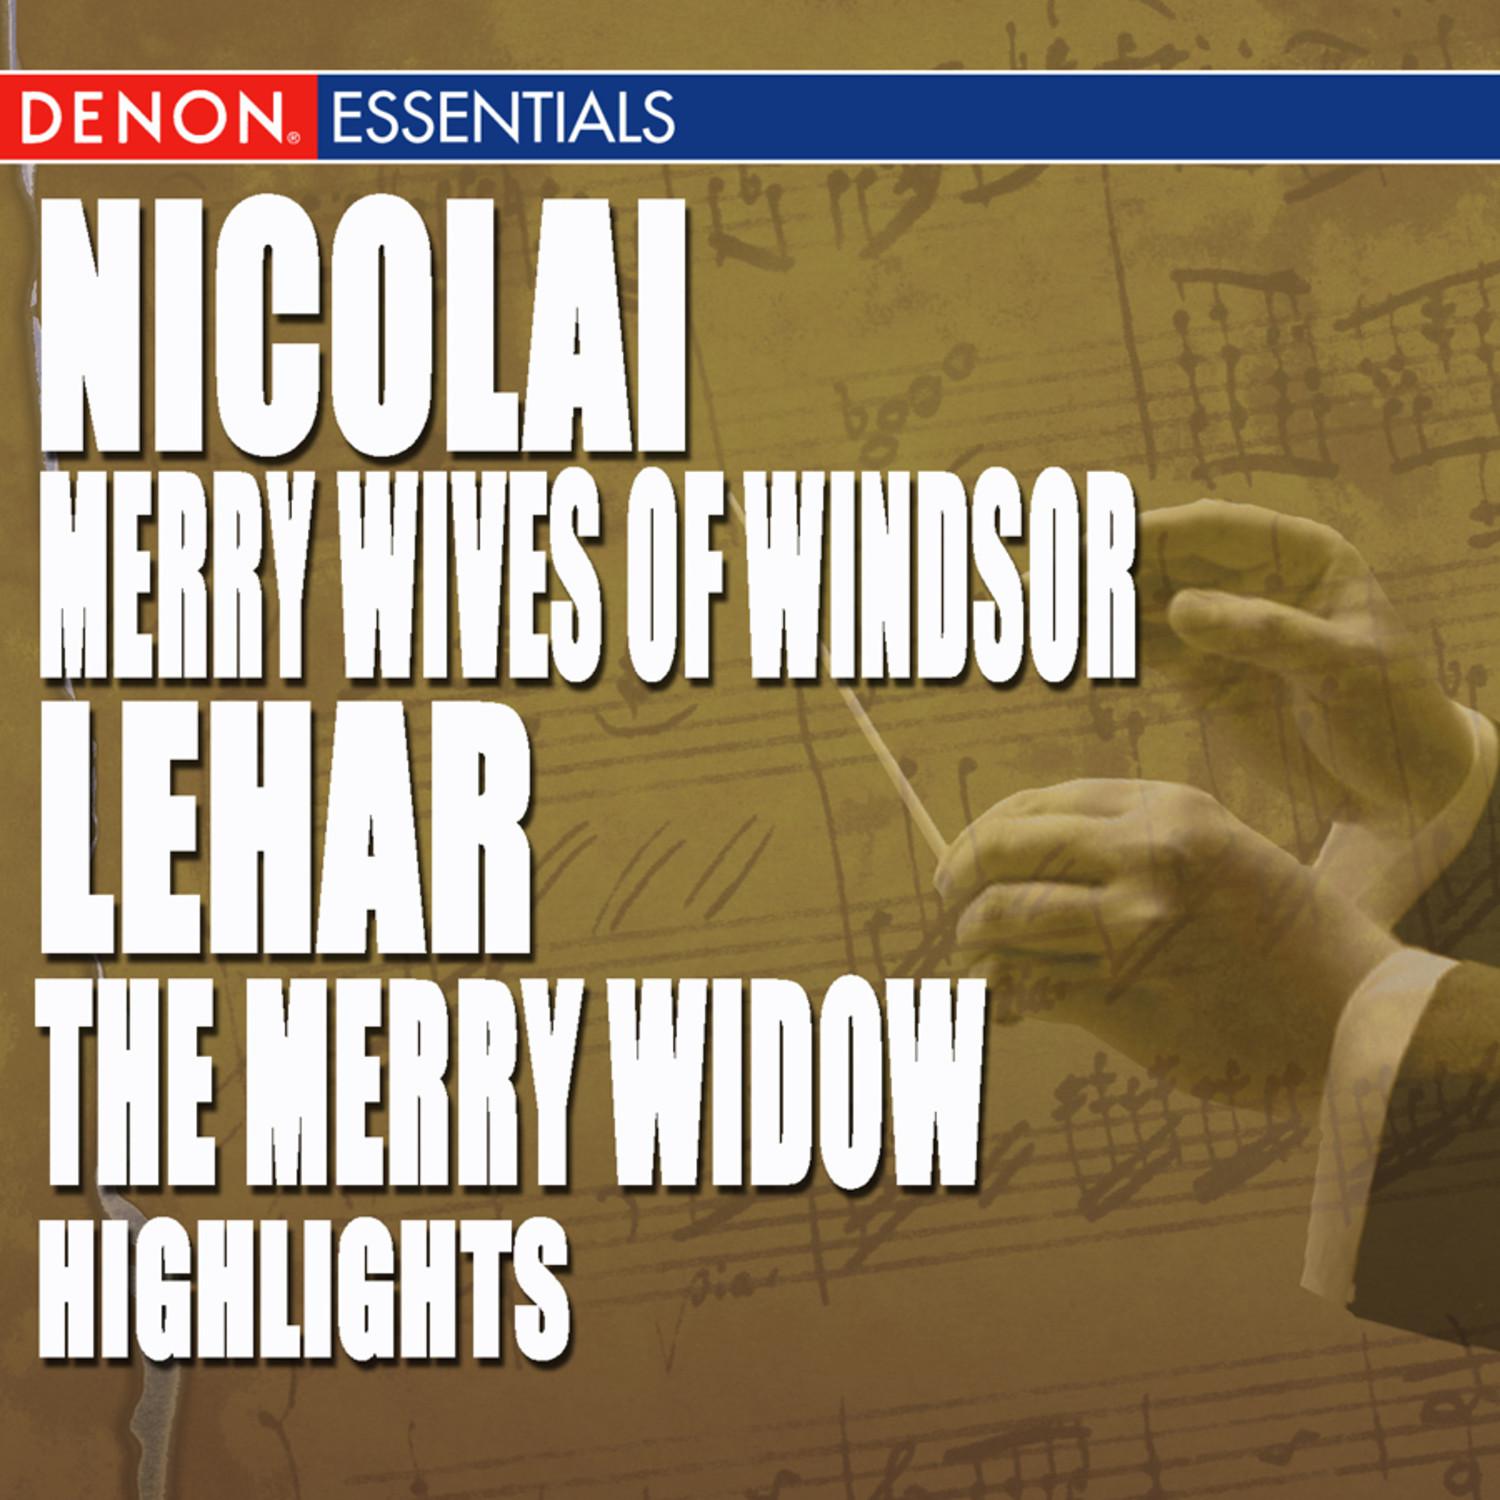 Nicolai: Merry Wives of Windsor Highlights  Leha r: The Merry Widow Highlights